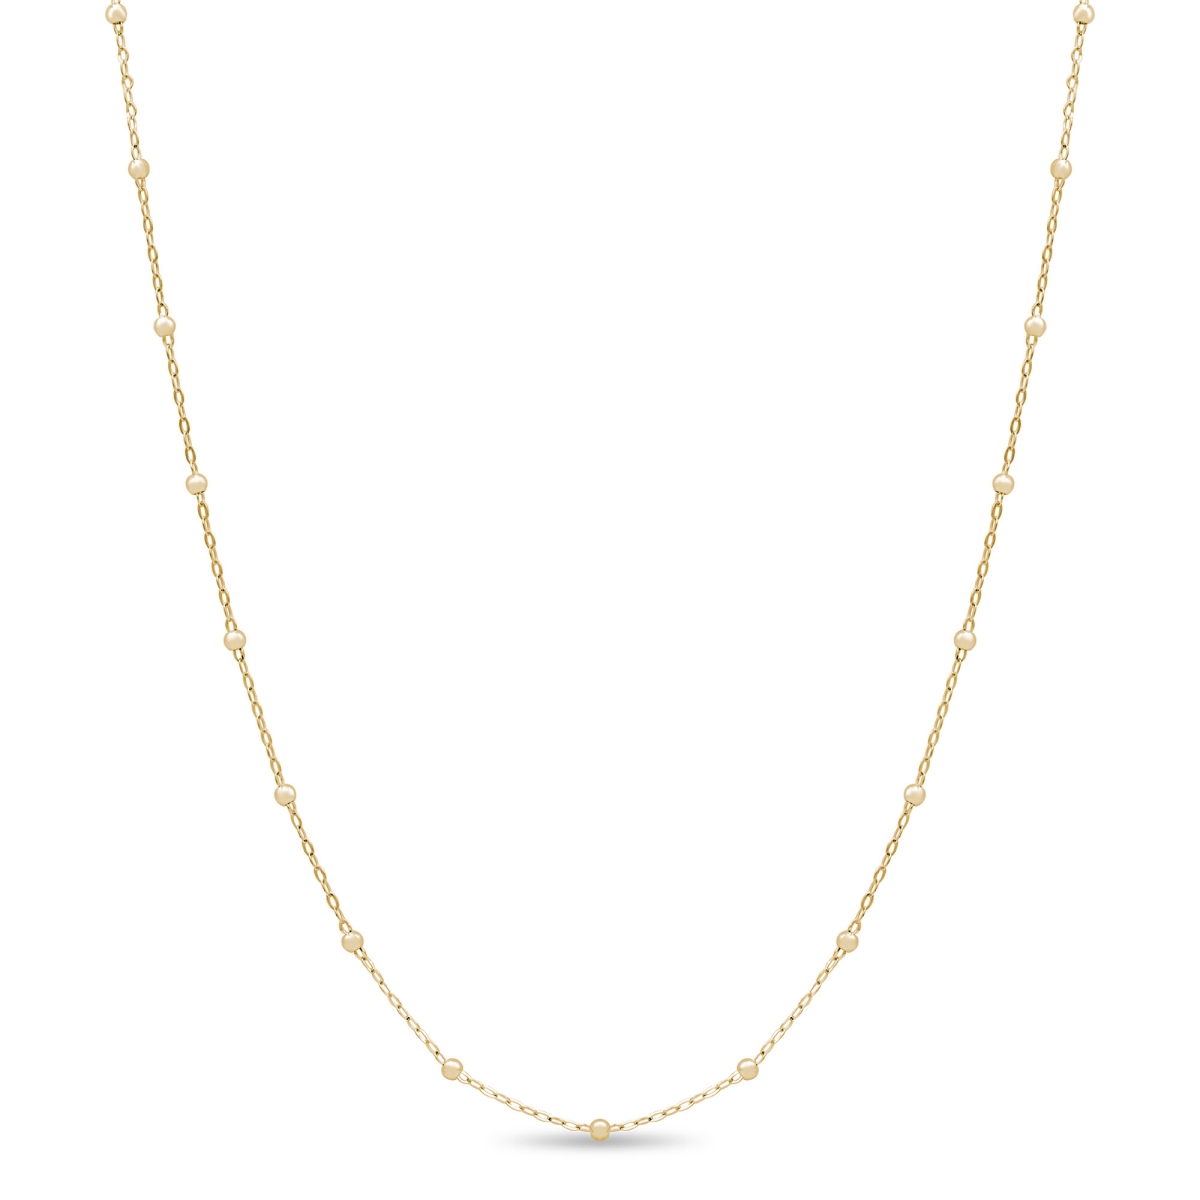 Picture of Majesty Diamonds MDR220249 Beads by The Yard Beaded Chain Necklace in 14K Yellow Gold